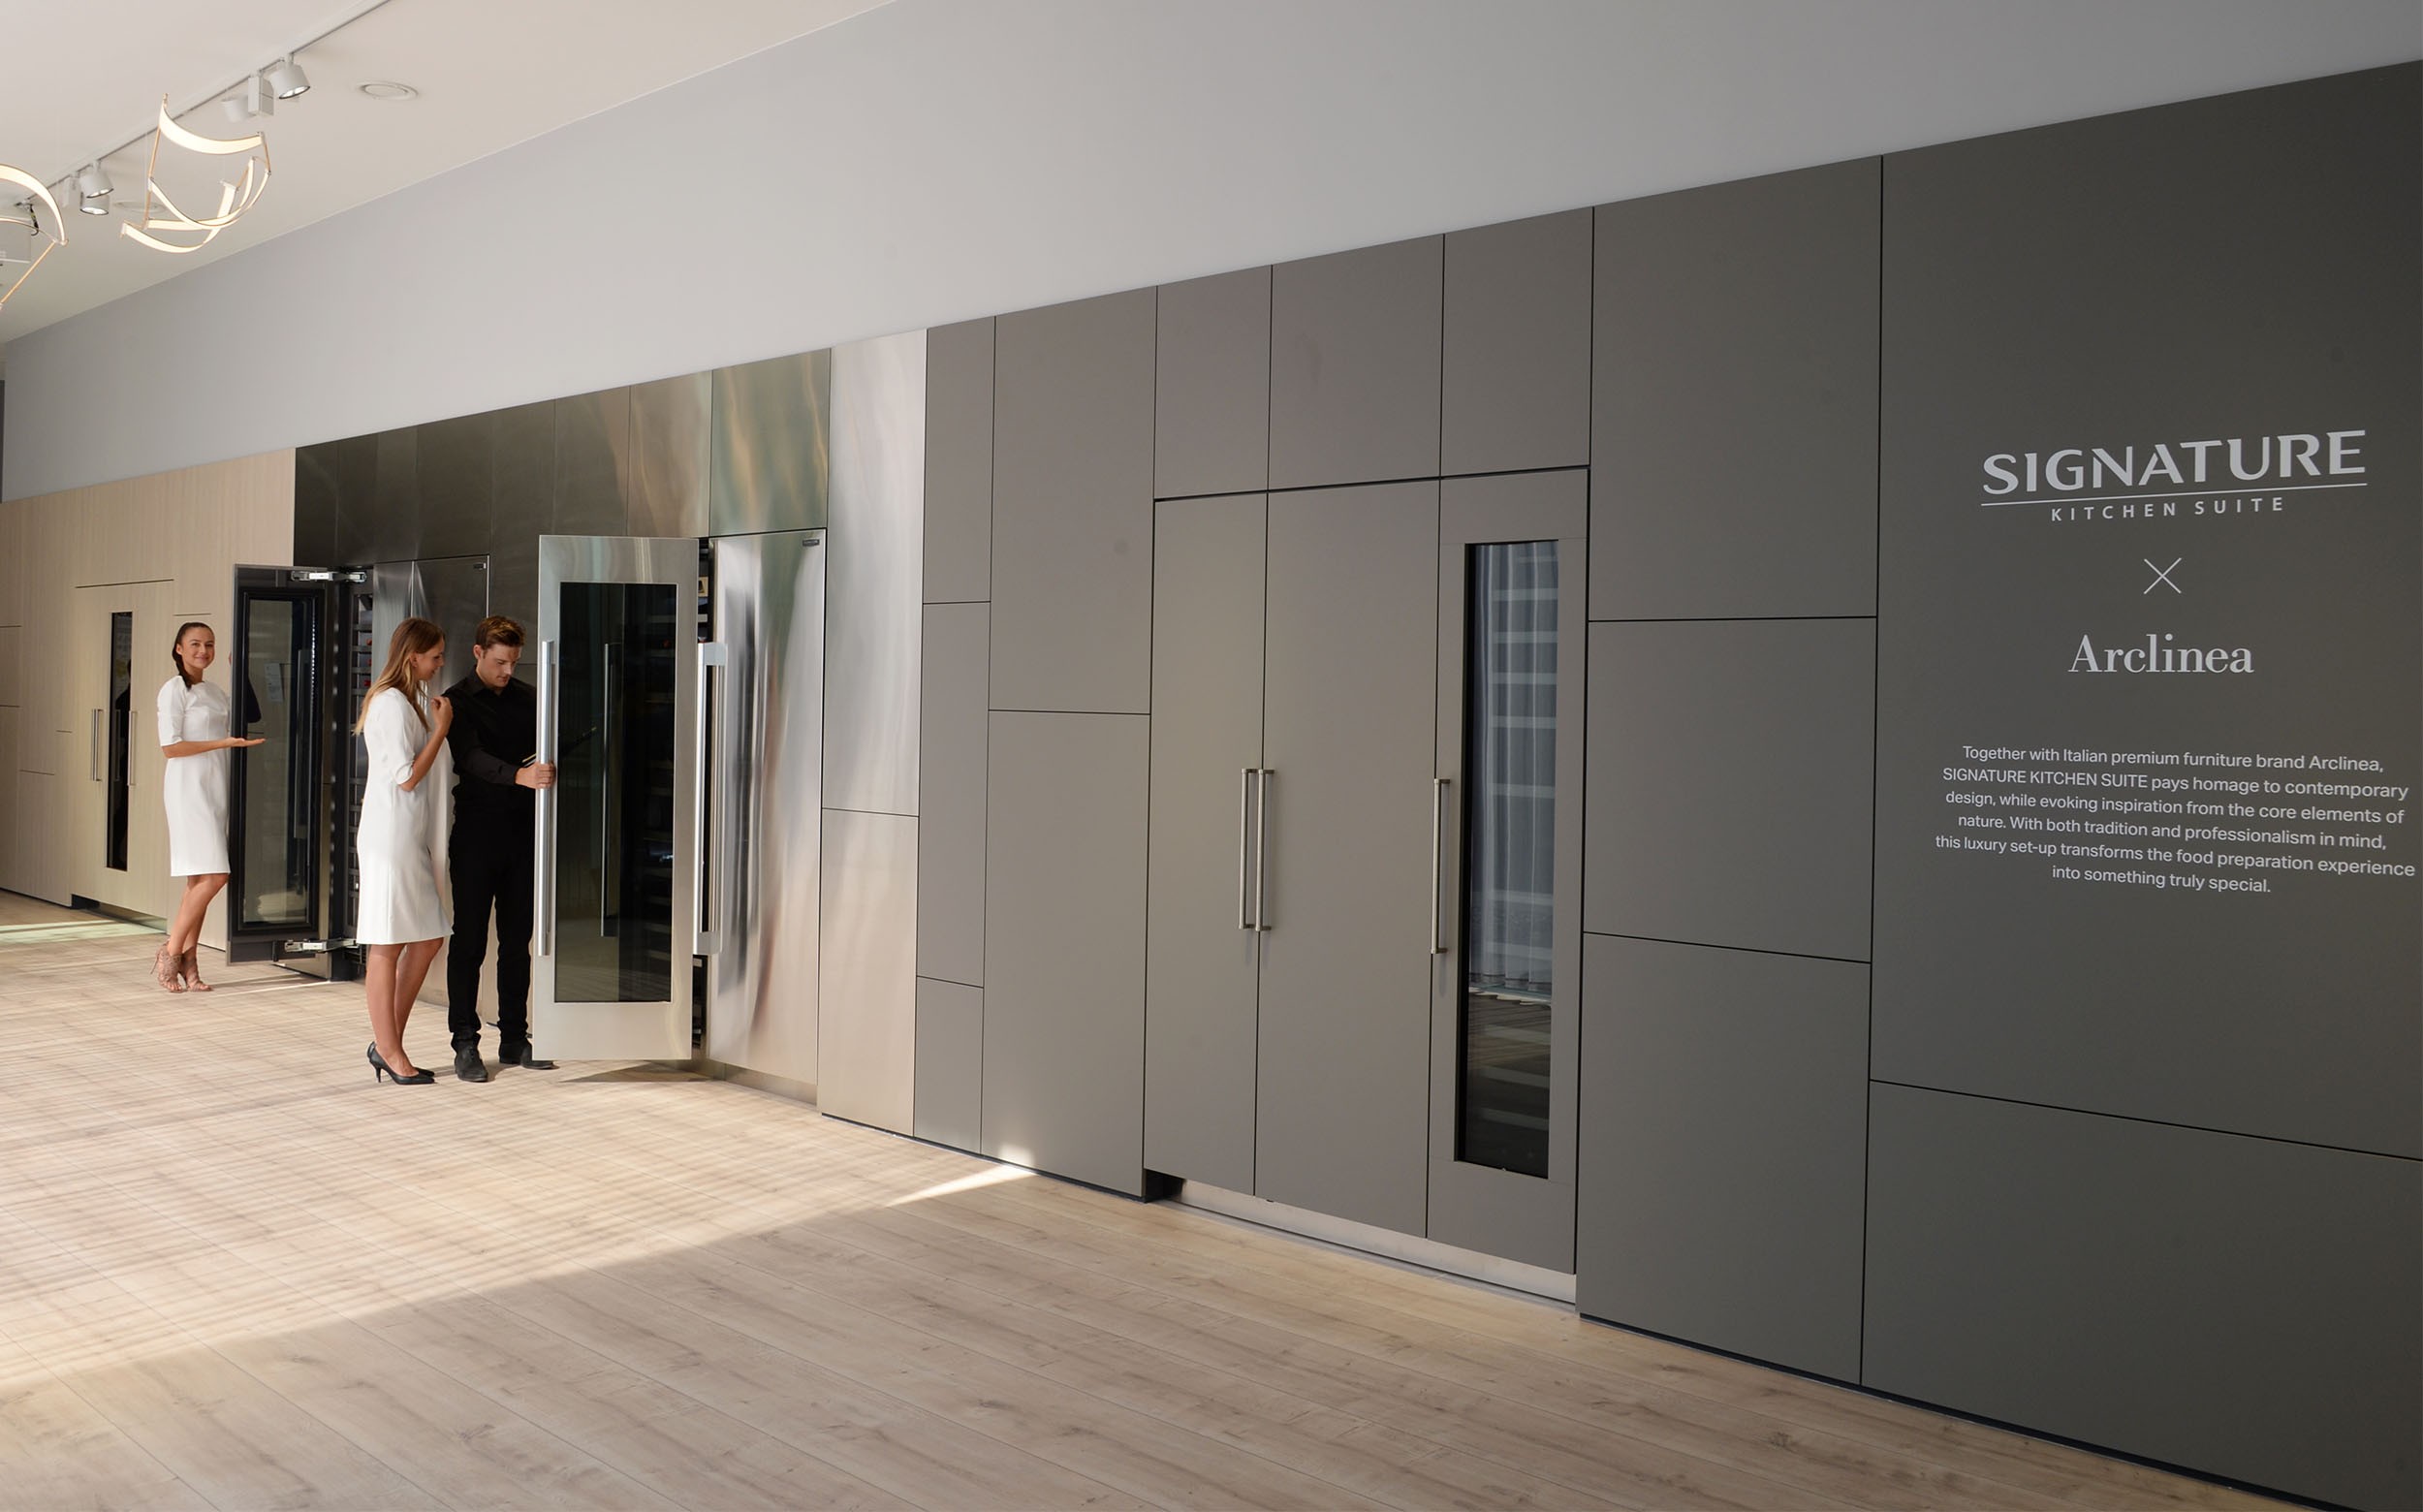 2 women and 1 man viewing wine cellars at SIGNATURE KITCHEN SUITE’s exhibition hall cooperated with Arclinea at IFA 2018